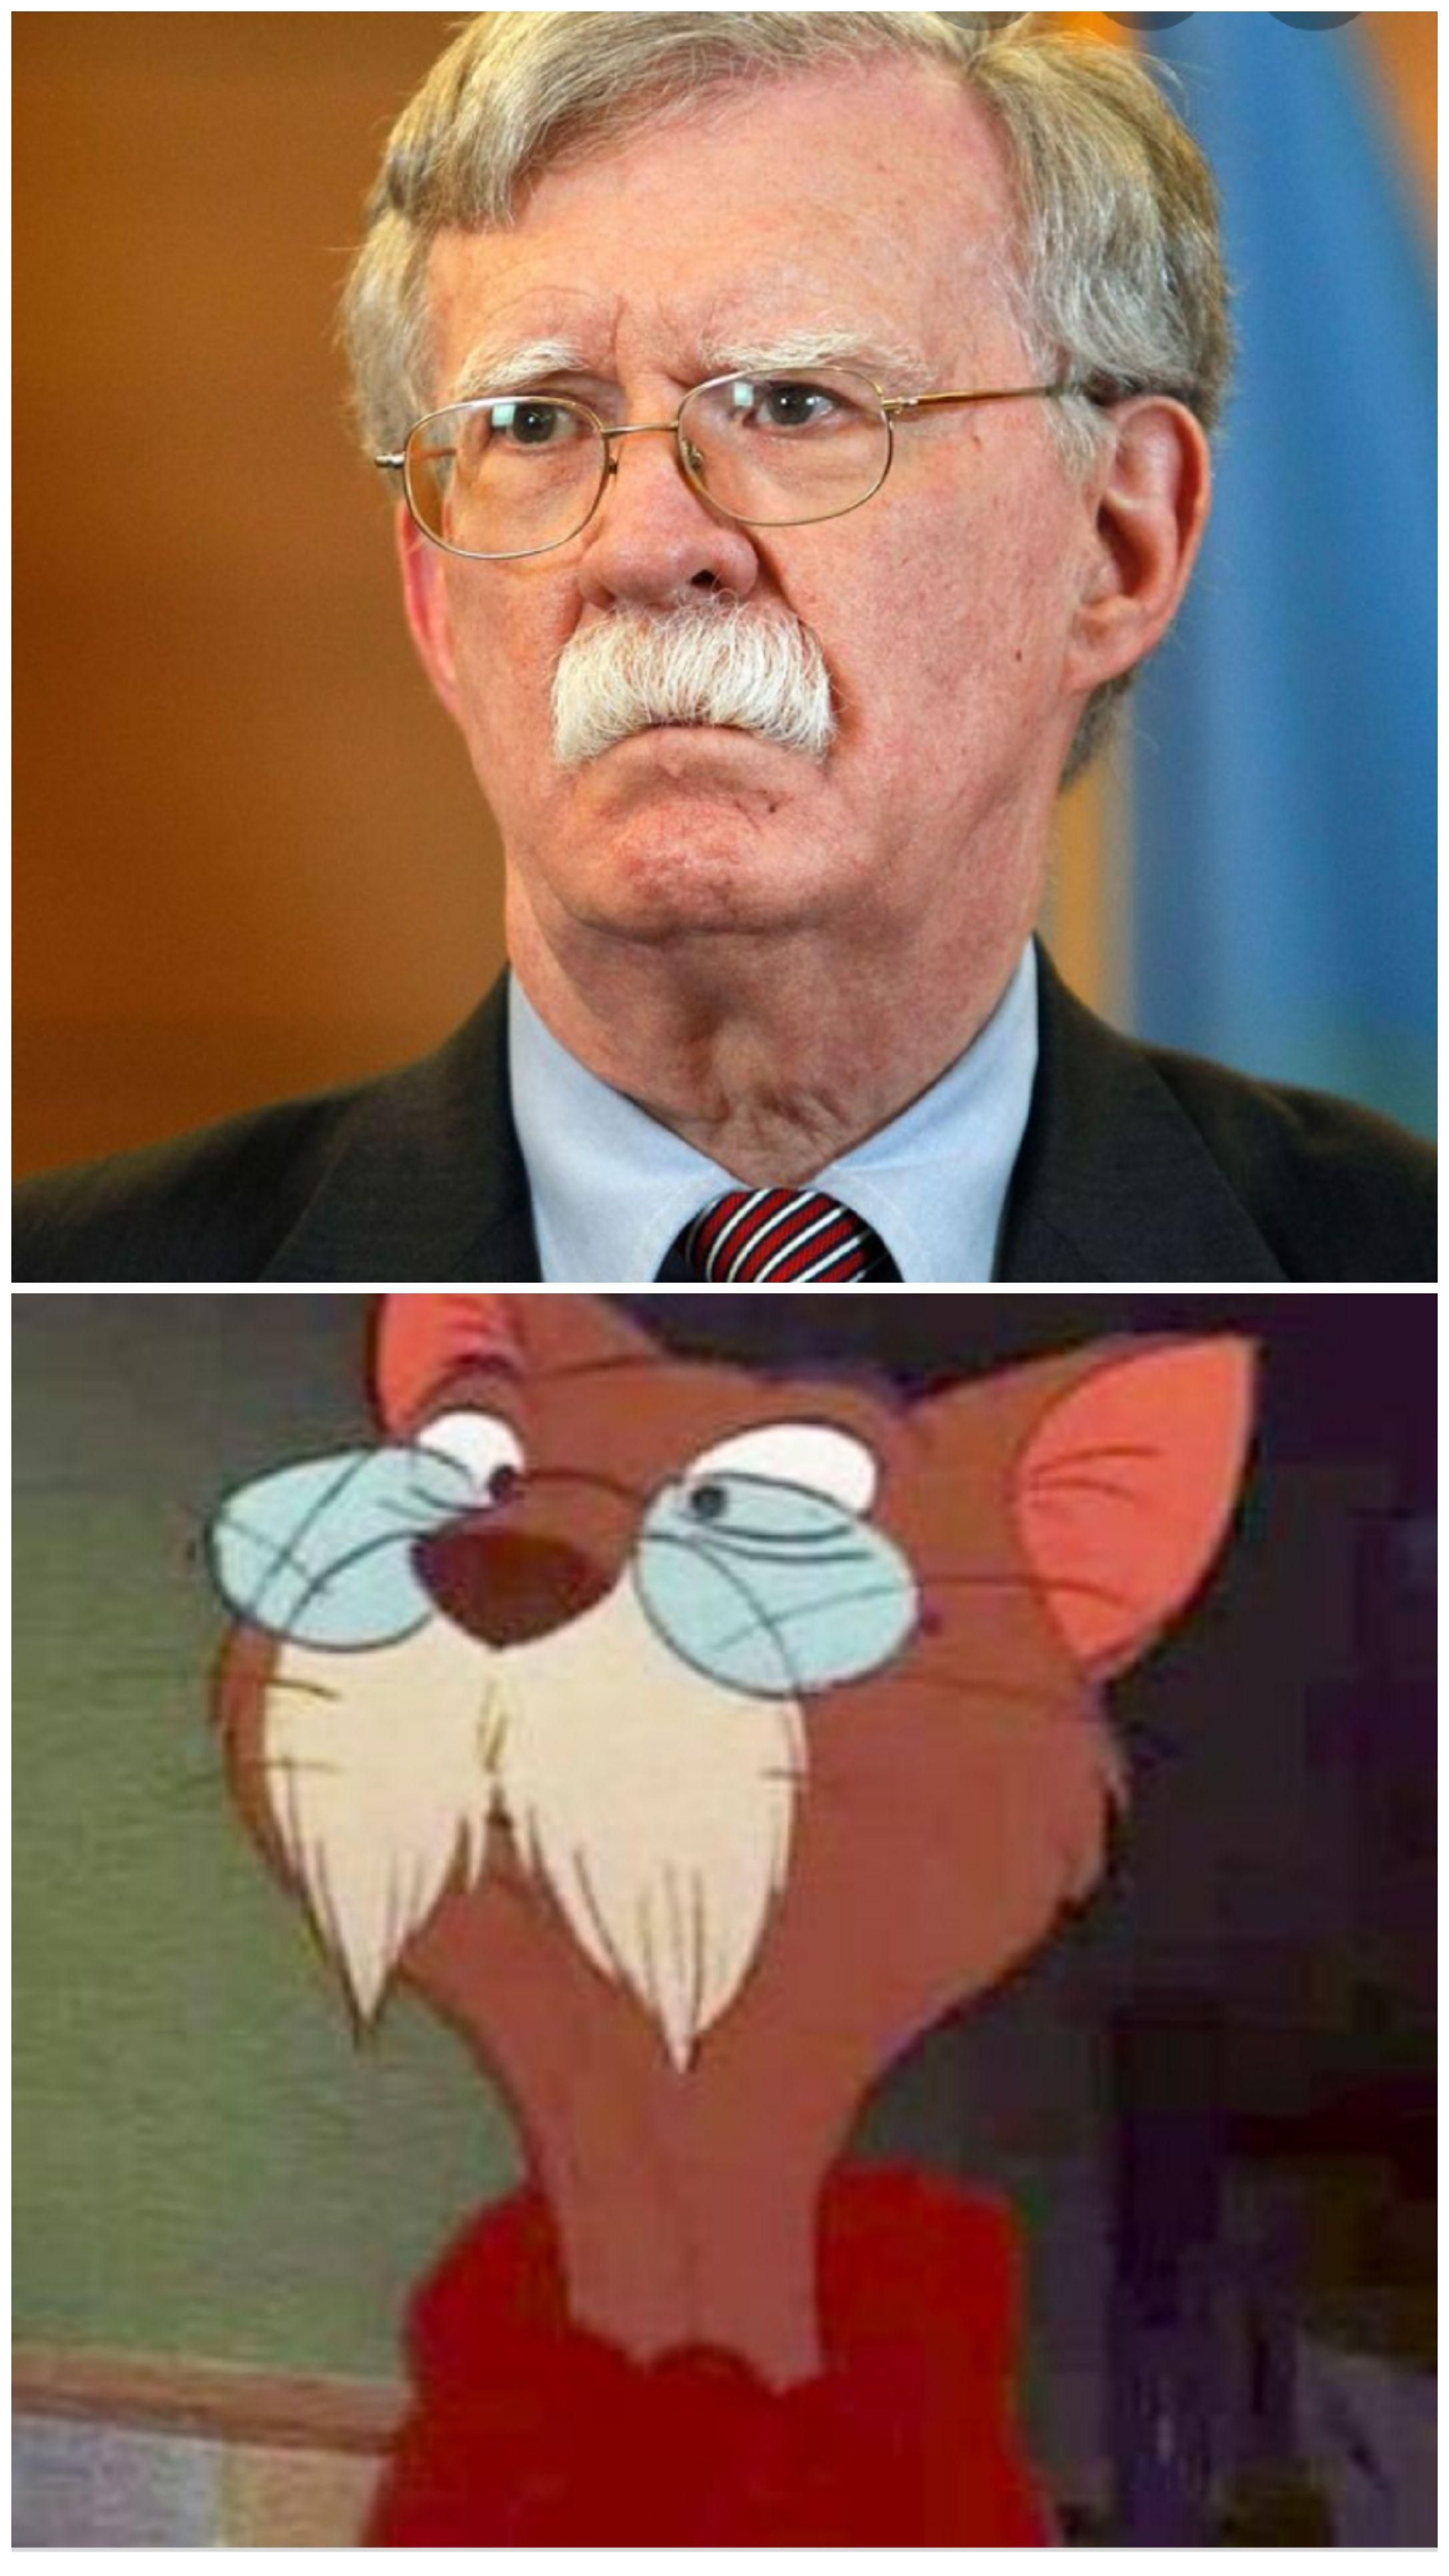 John Bolton looks like the cat from the Rescuers!